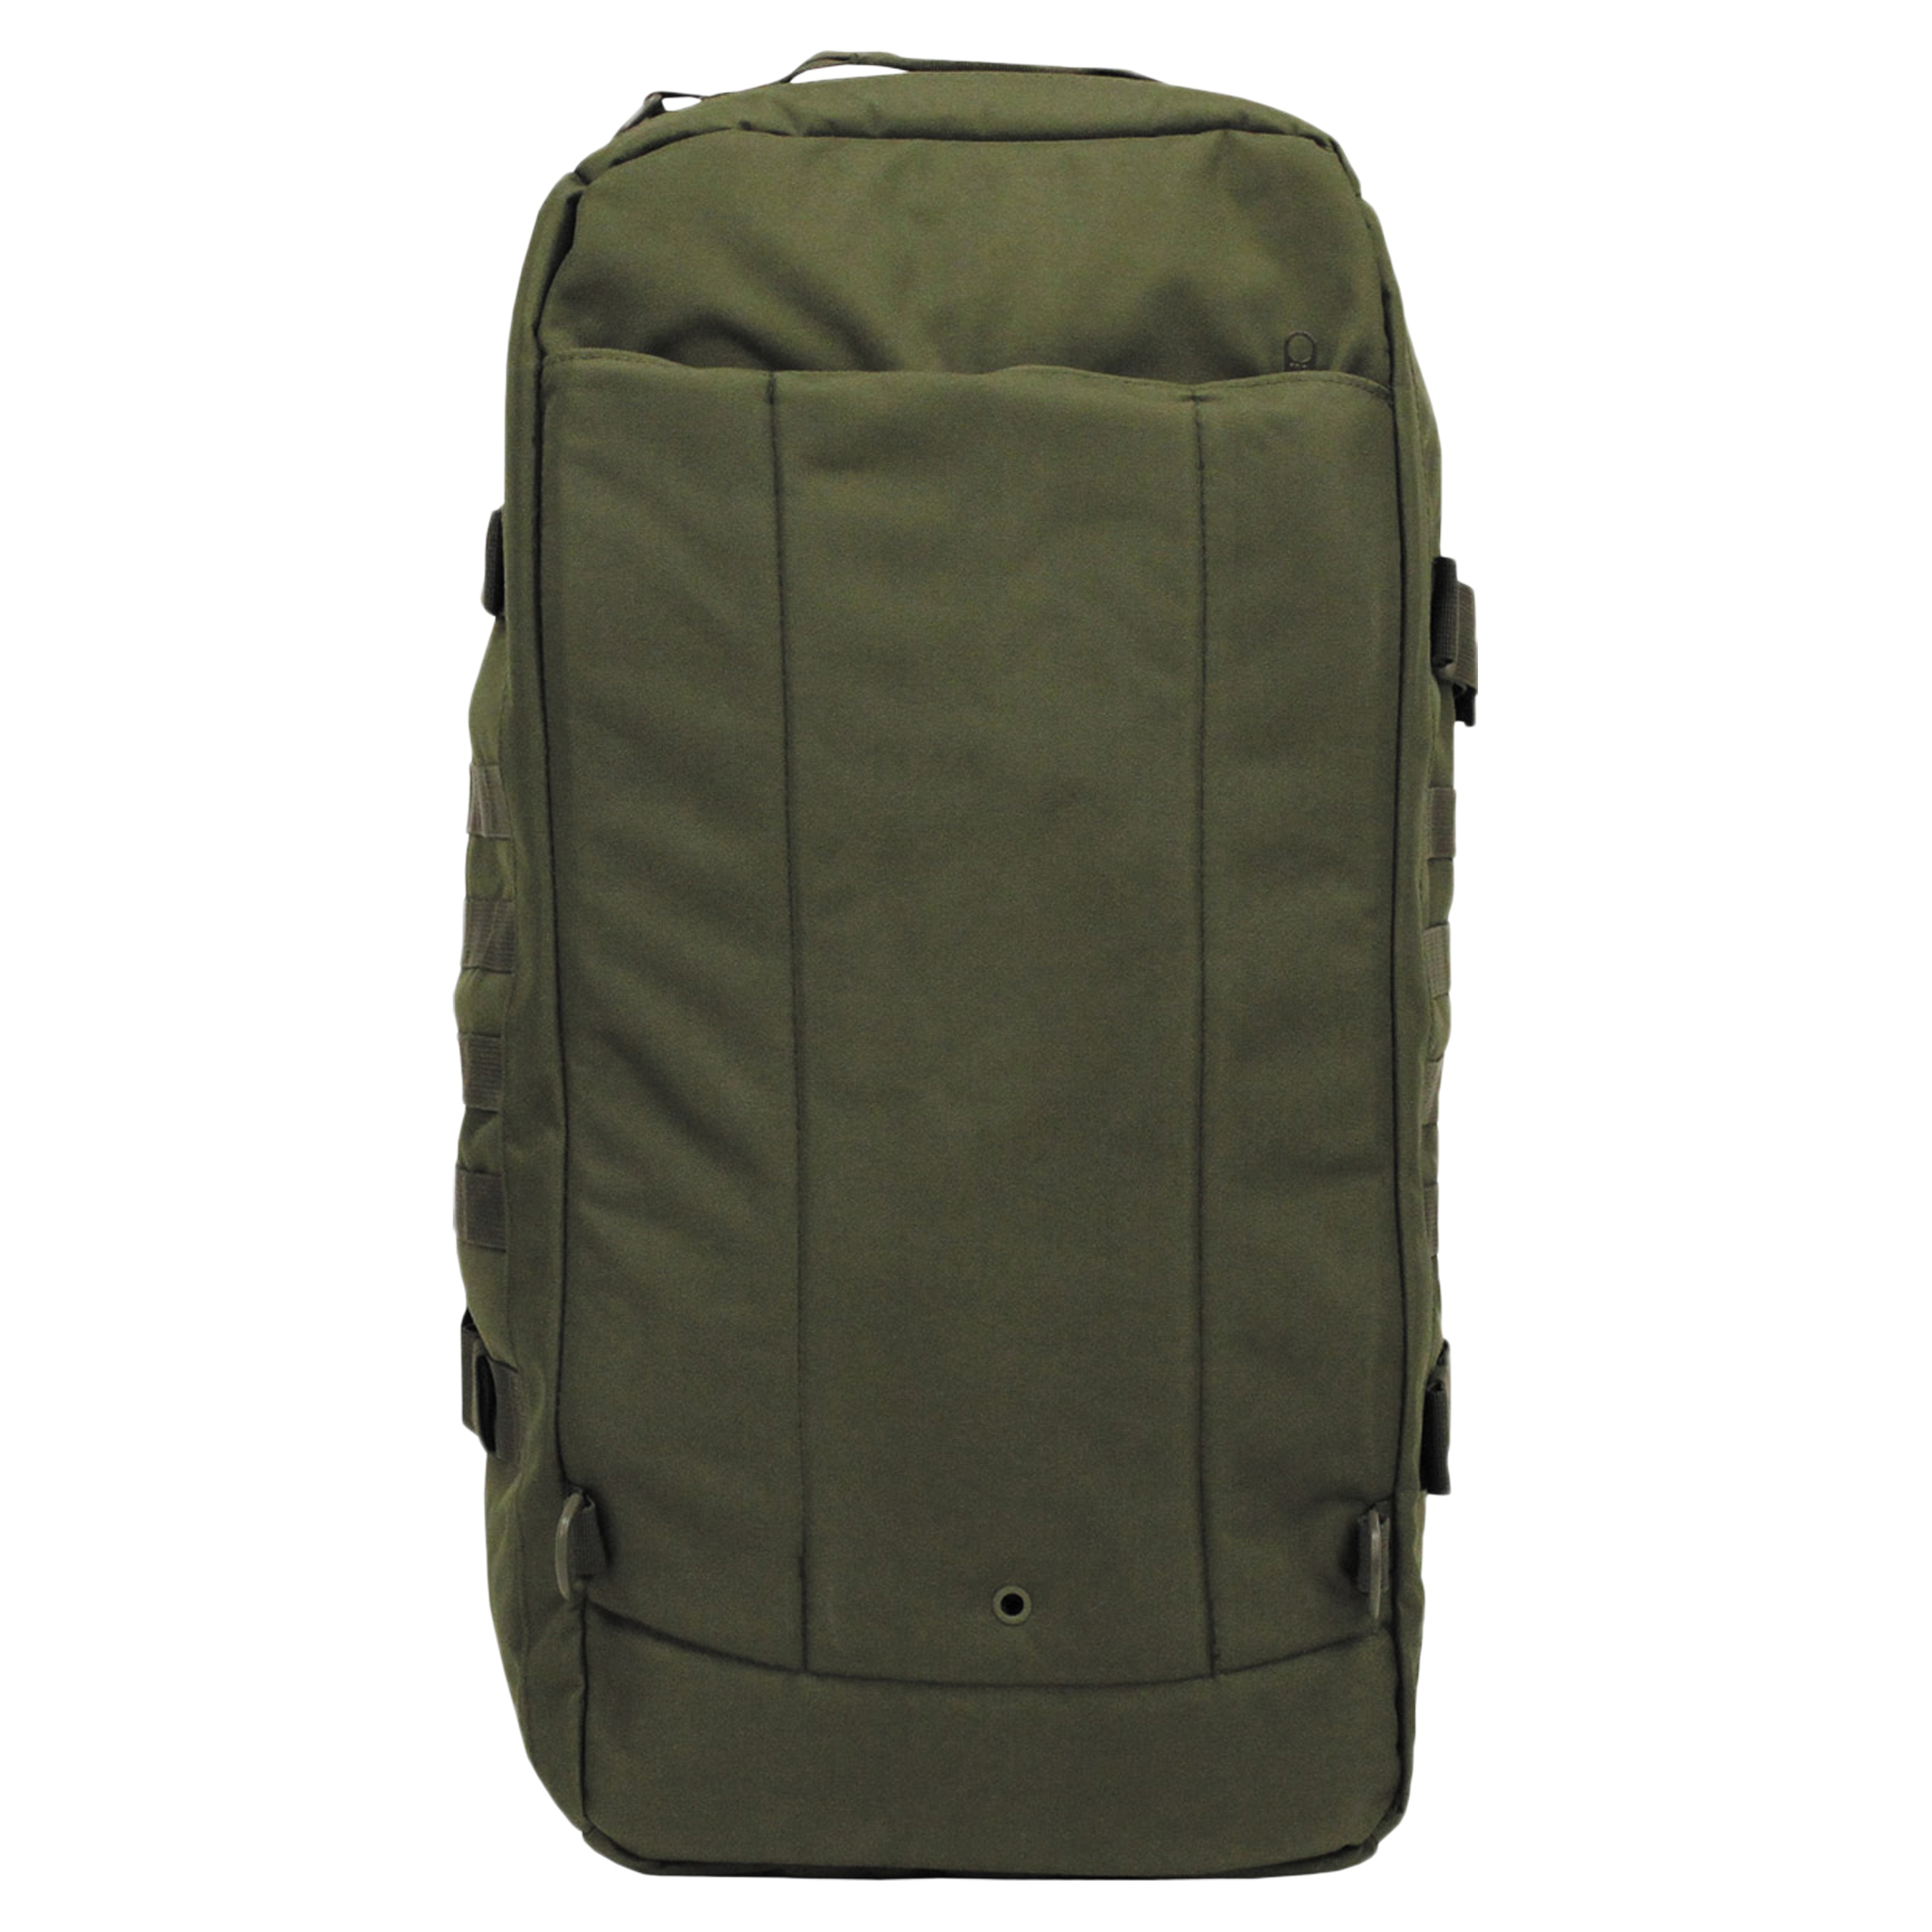 Purchase the MFH Backpack Travel Bag olive by ASMC